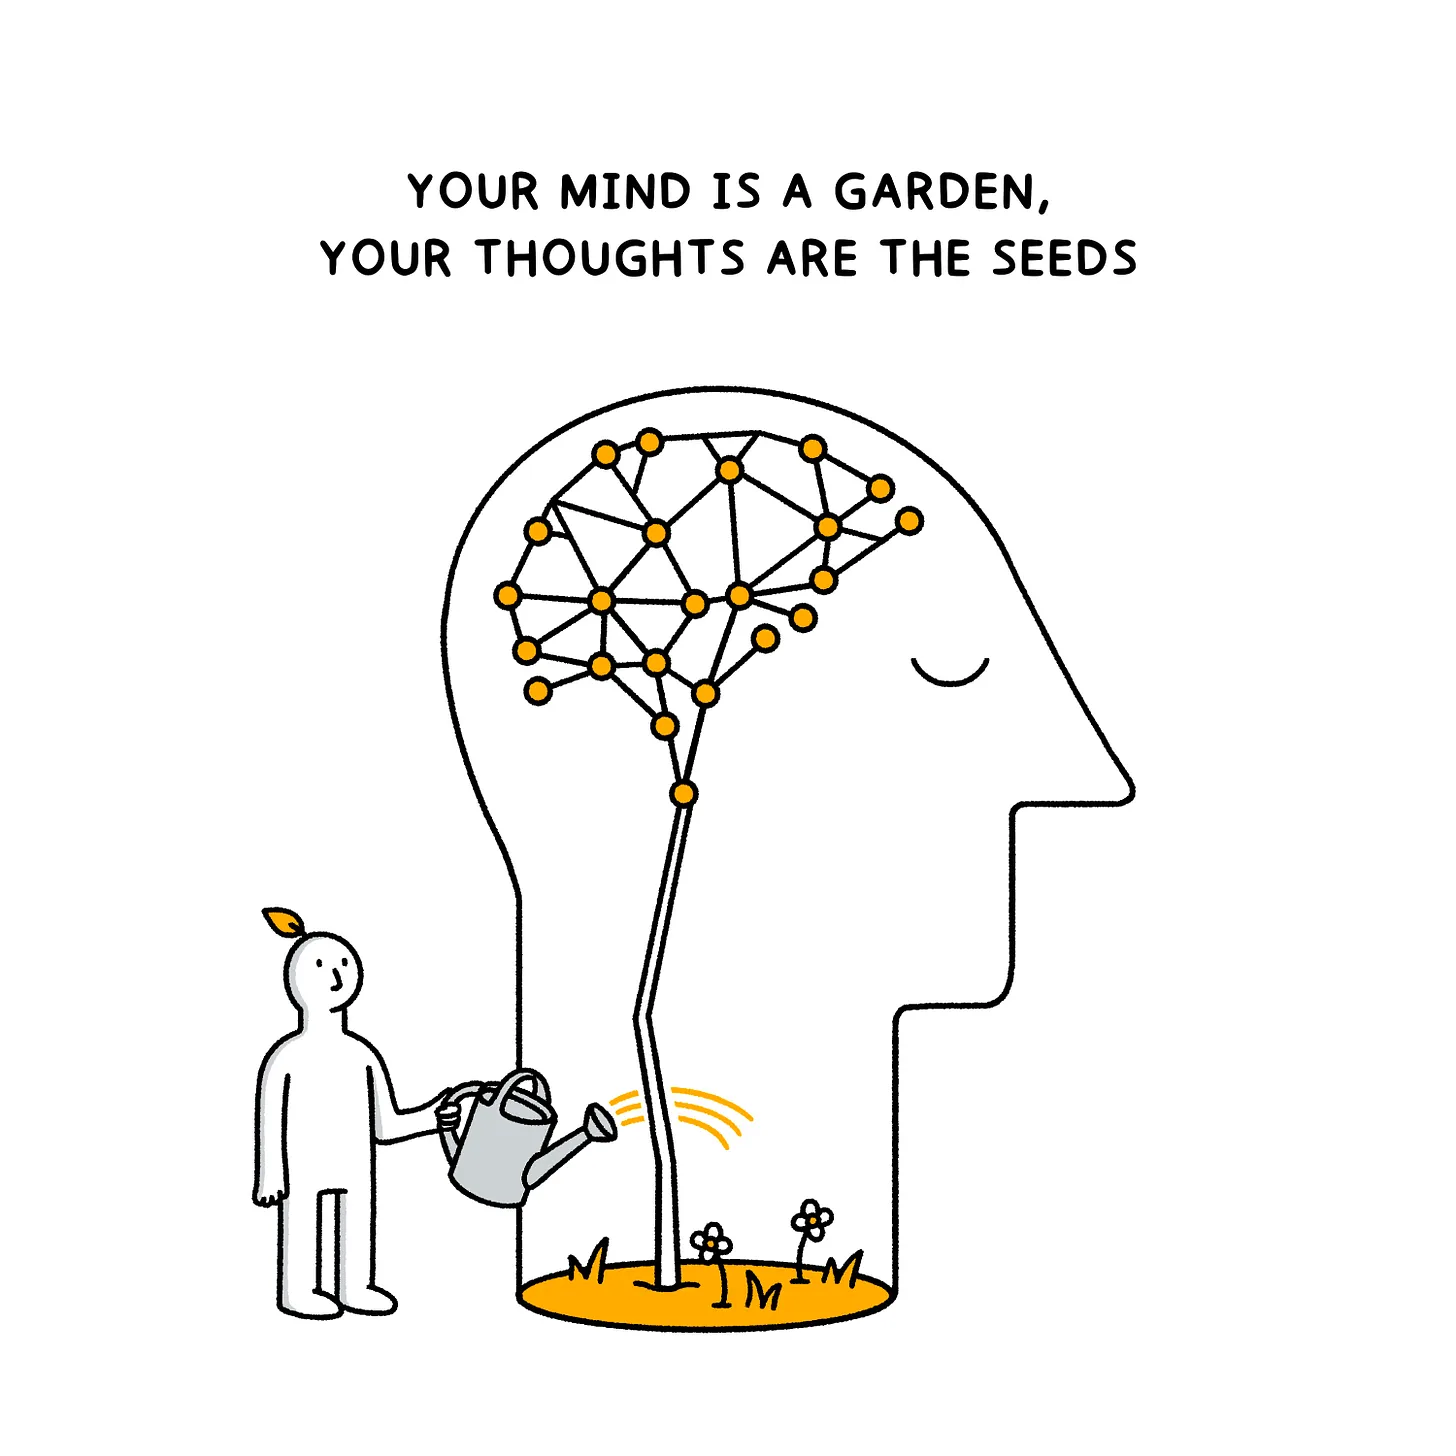 Your mind is a garden, your thoughts are the seeds.